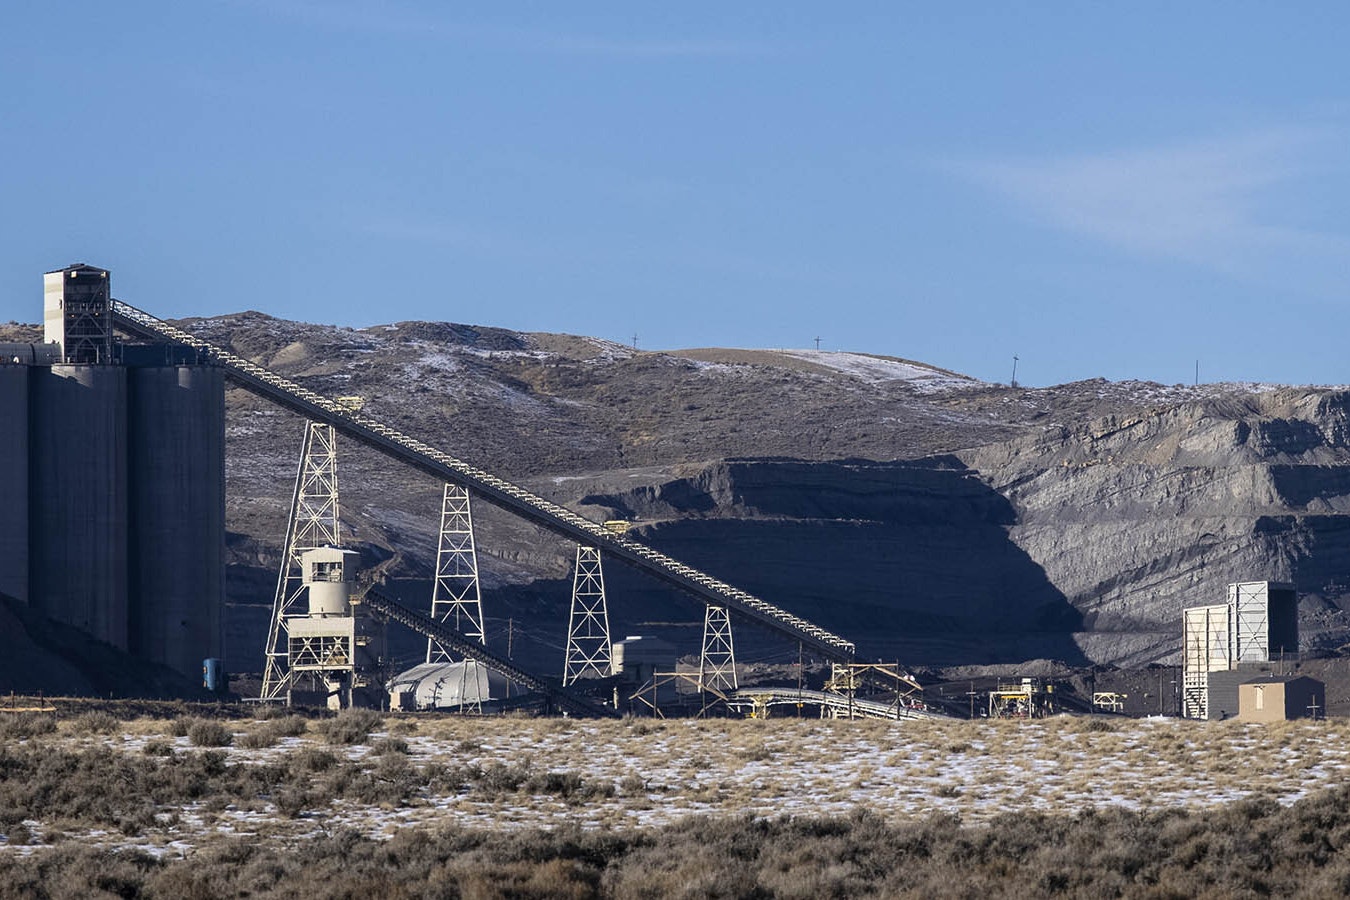 A coal mine near Kemmerer will provide the raw material for an effort to make a line of skincare products from Wyoming coal.